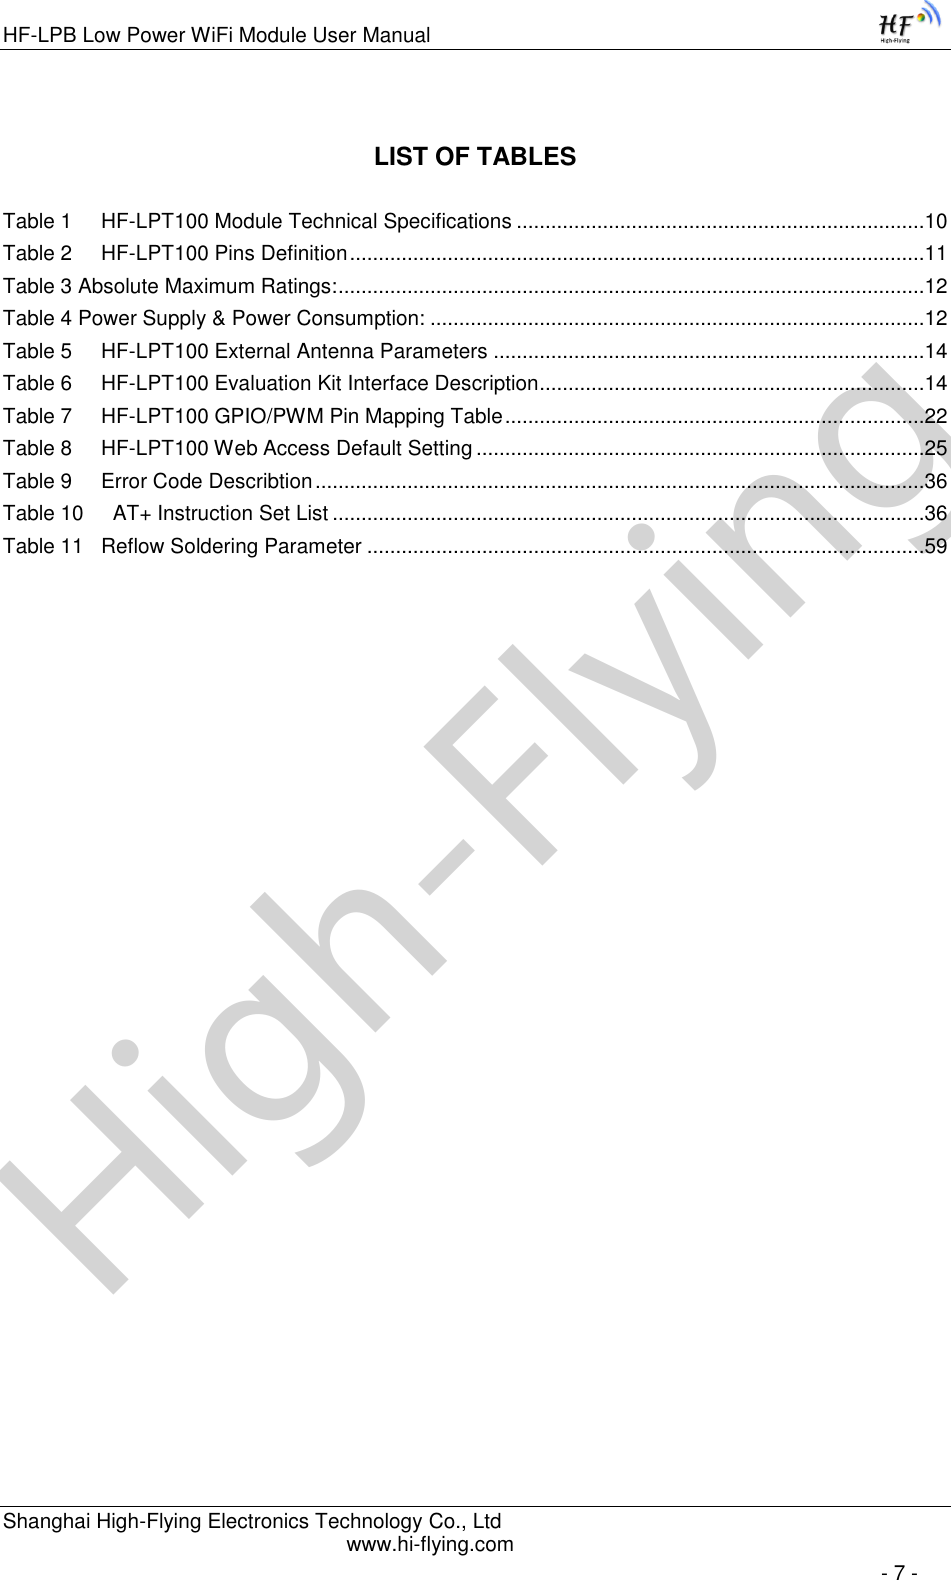 High-FlyingHF-LPB Low Power WiFi Module User Manual Shanghai High-Flying Electronics Technology Co., Ltd www.hi-flying.com   - 7 - LIST OF TABLES  Table 1     HF-LPT100 Module Technical Specifications .......................................................................10 Table 2     HF-LPT100 Pins Definition ....................................................................................................11 Table 3 Absolute Maximum Ratings: ......................................................................................................12 Table 4 Power Supply &amp; Power Consumption: ......................................................................................12 Table 5     HF-LPT100 External Antenna Parameters ...........................................................................14 Table 6     HF-LPT100 Evaluation Kit Interface Description ...................................................................14 Table 7     HF-LPT100 GPIO/PWM Pin Mapping Table .........................................................................22 Table 8     HF-LPT100 Web Access Default Setting ..............................................................................25 Table 9     Error Code Describtion ..........................................................................................................36 Table 10     AT+ Instruction Set List .......................................................................................................36 Table 11   Reflow Soldering Parameter .................................................................................................59 